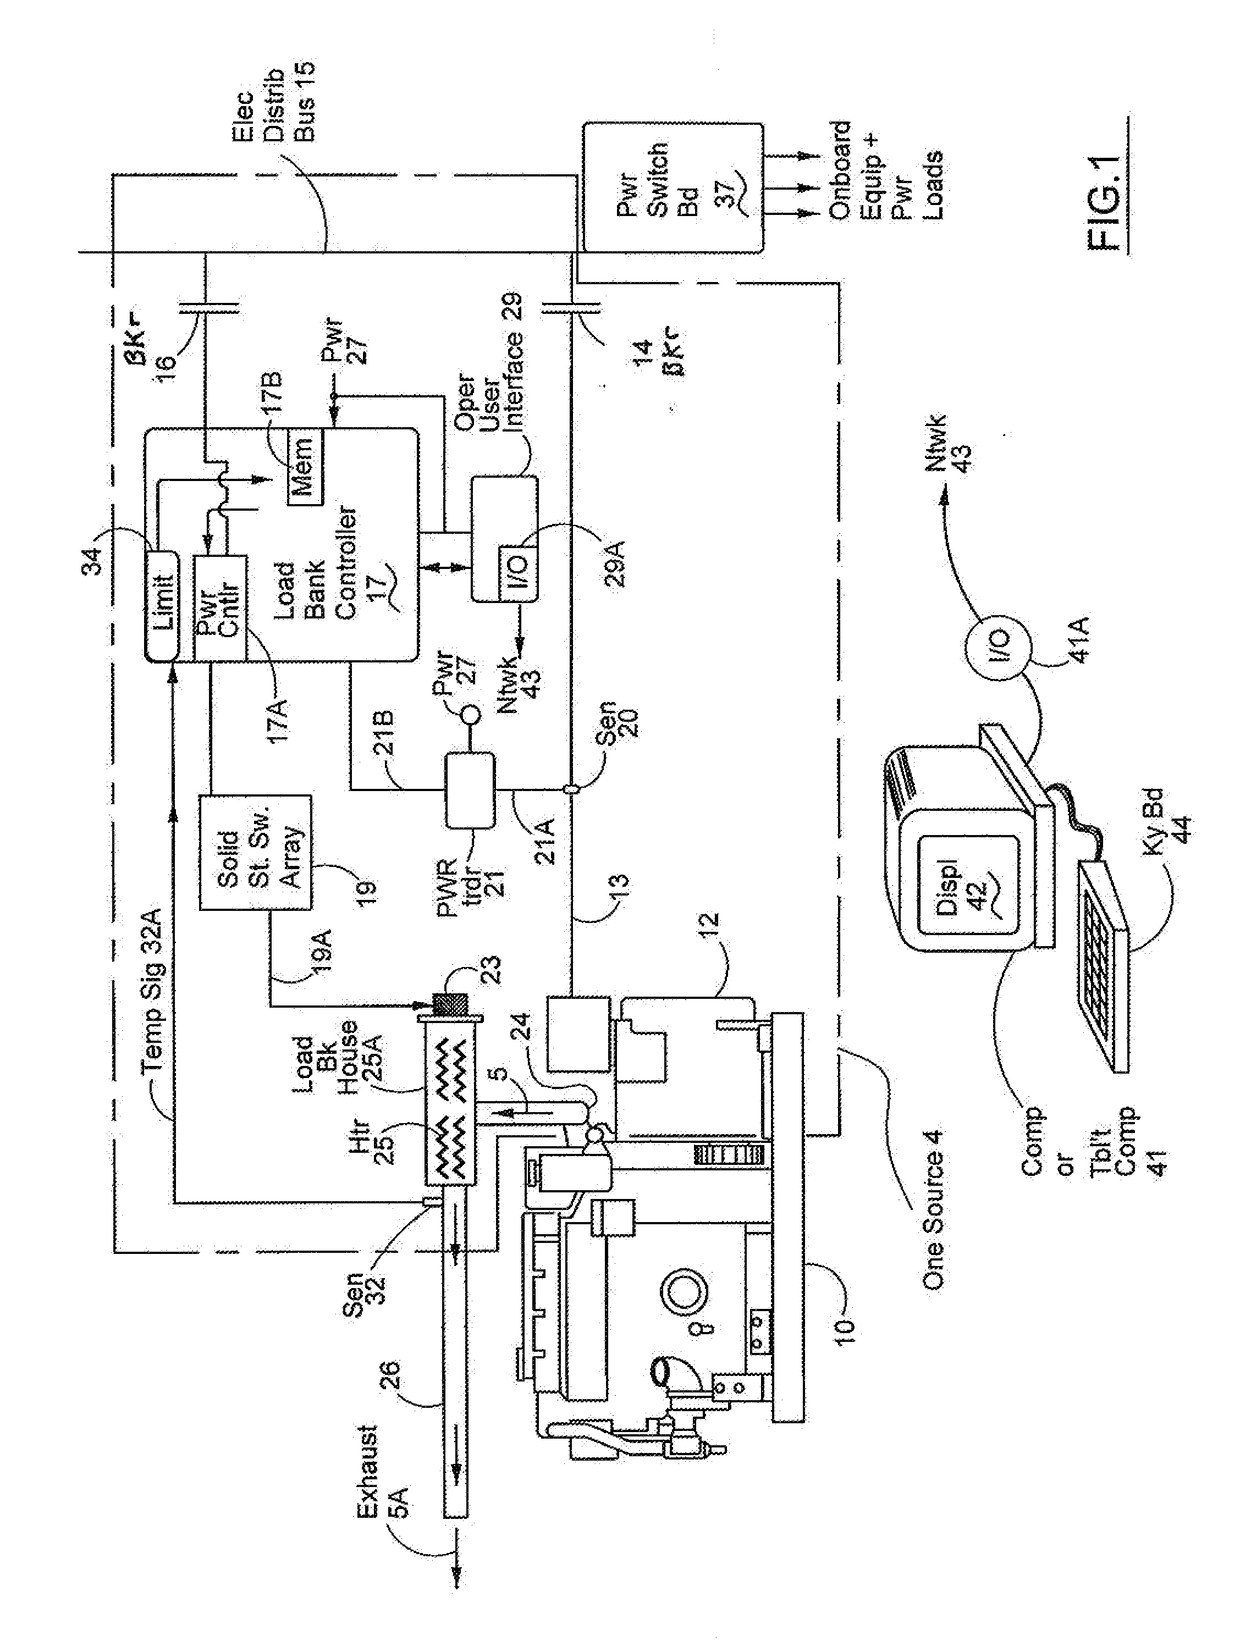 Diesel Electric Generator Load Bank System Cooled by Exhaust Gas and Method Therefor